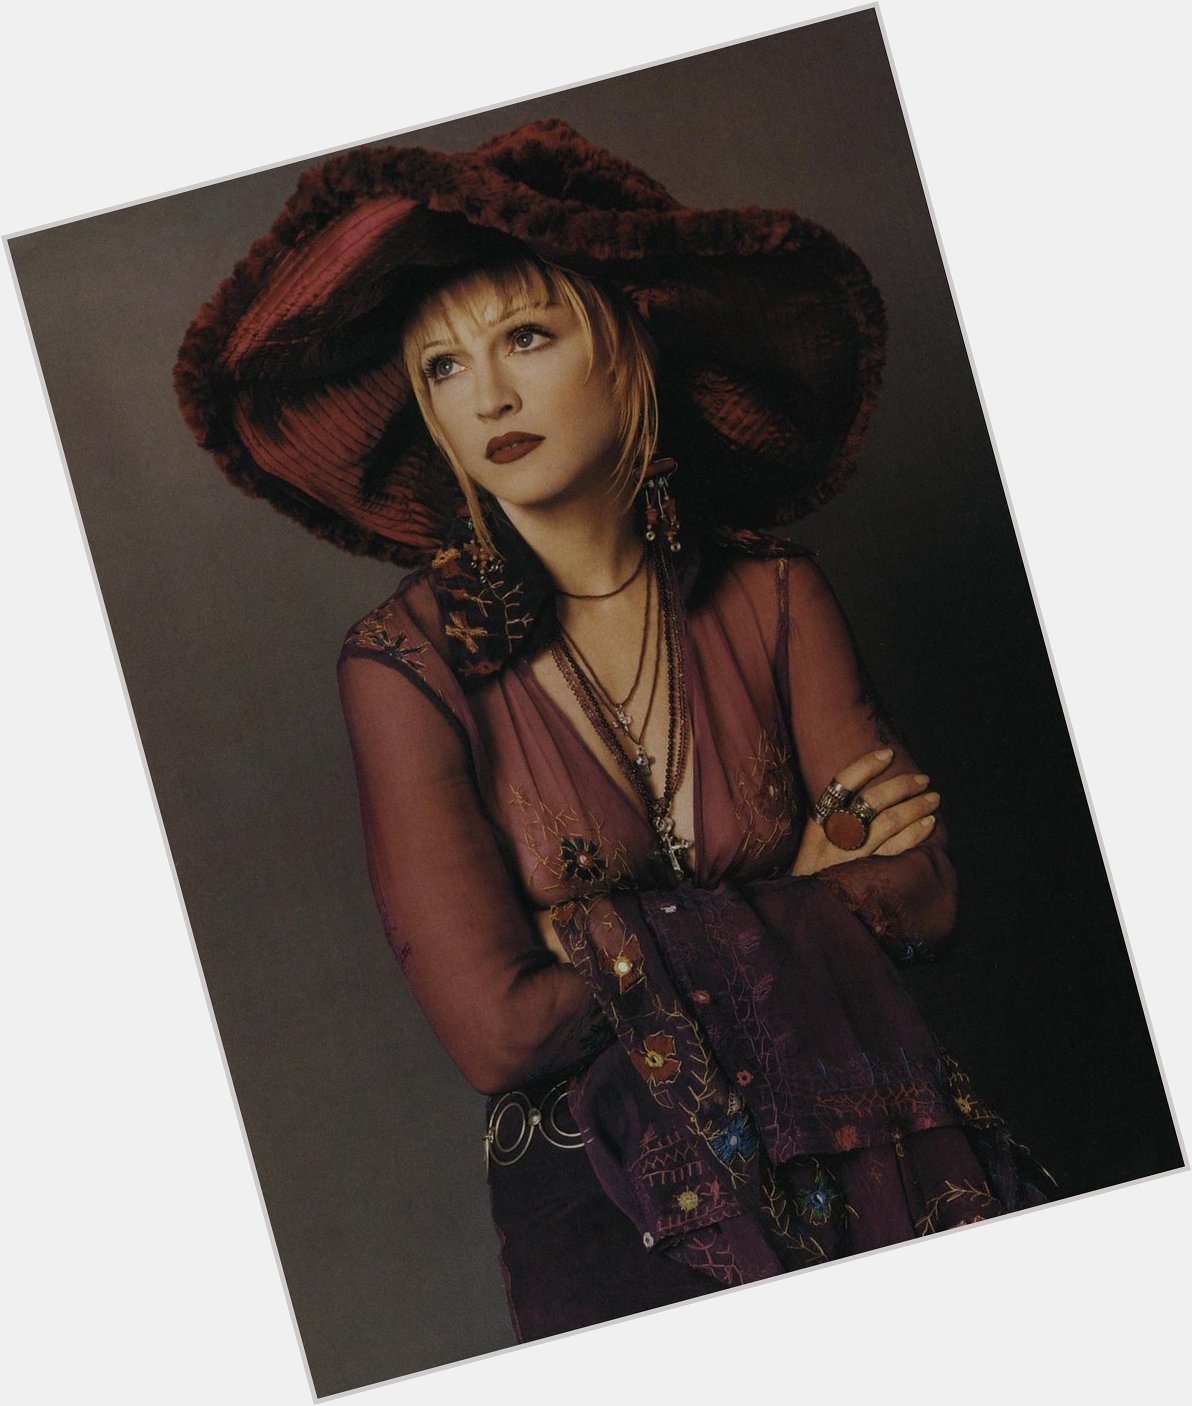  in Anna Sui for shot in October 1992 by Steven Meisel. Happy birthday! xxx Anna 